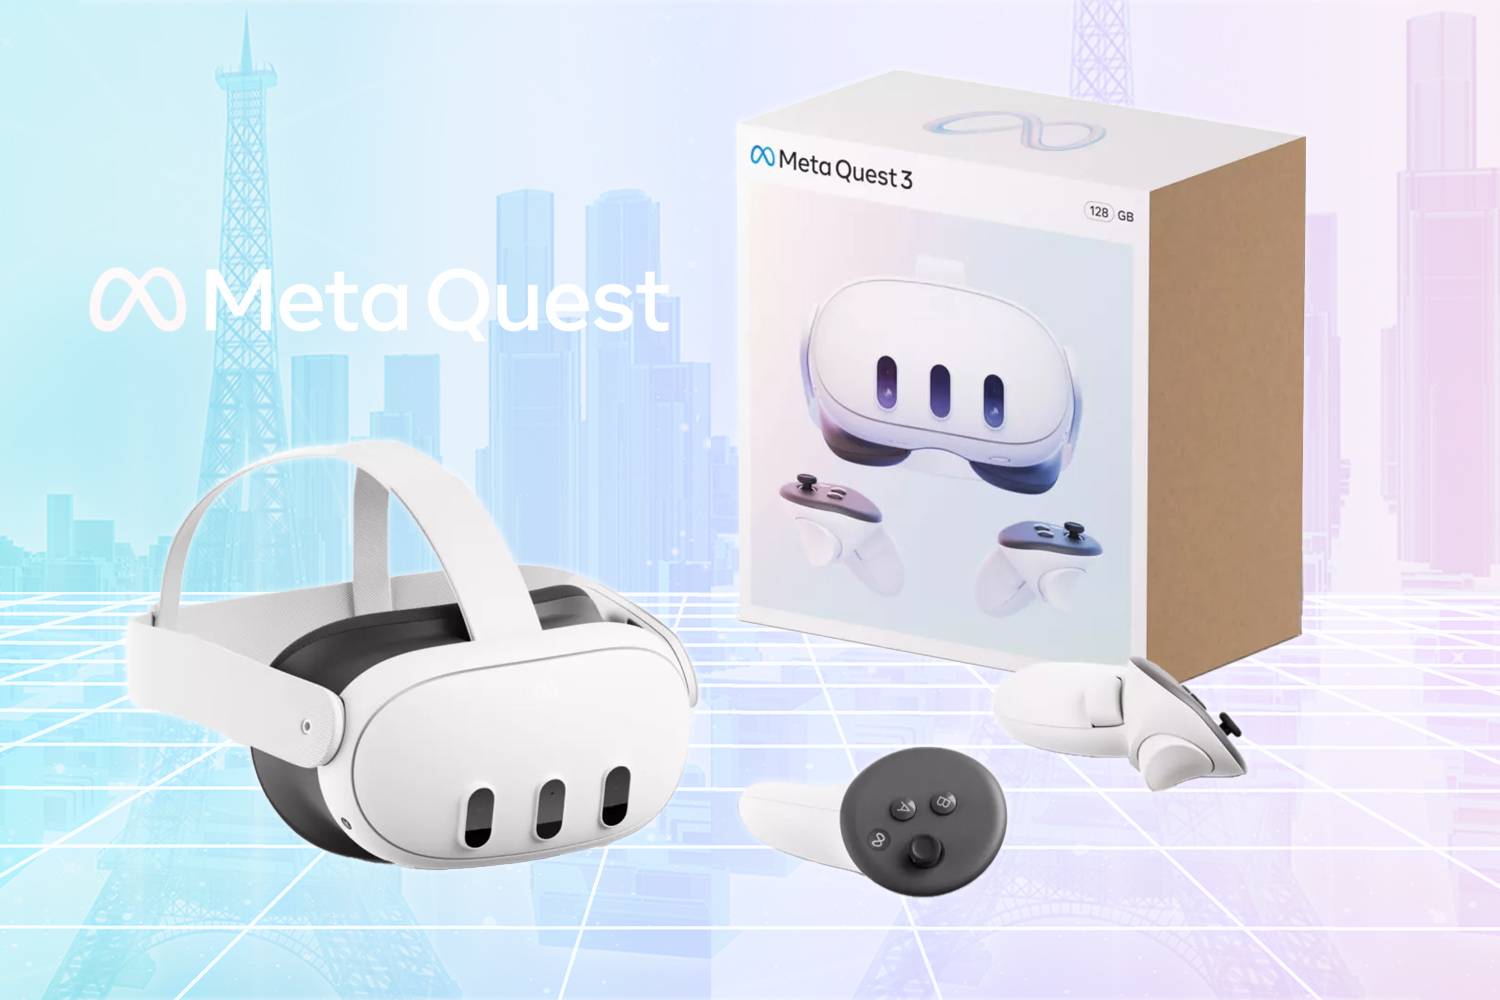 Win this Meta Quest 3 - Only 908 Entries